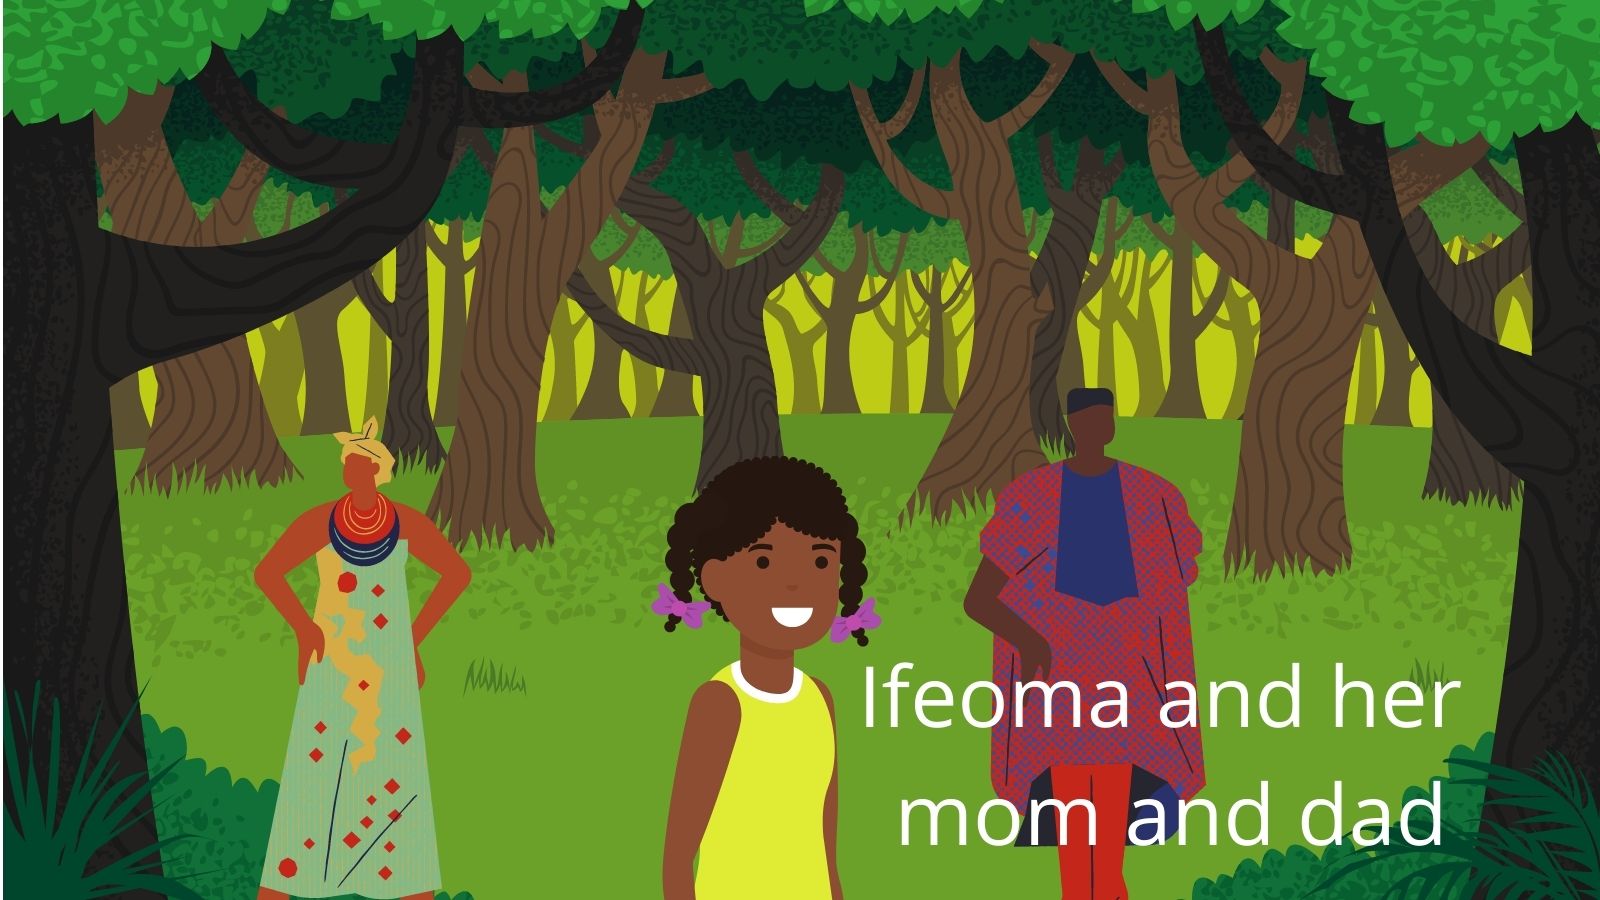 Ifeoma and the cursed forest